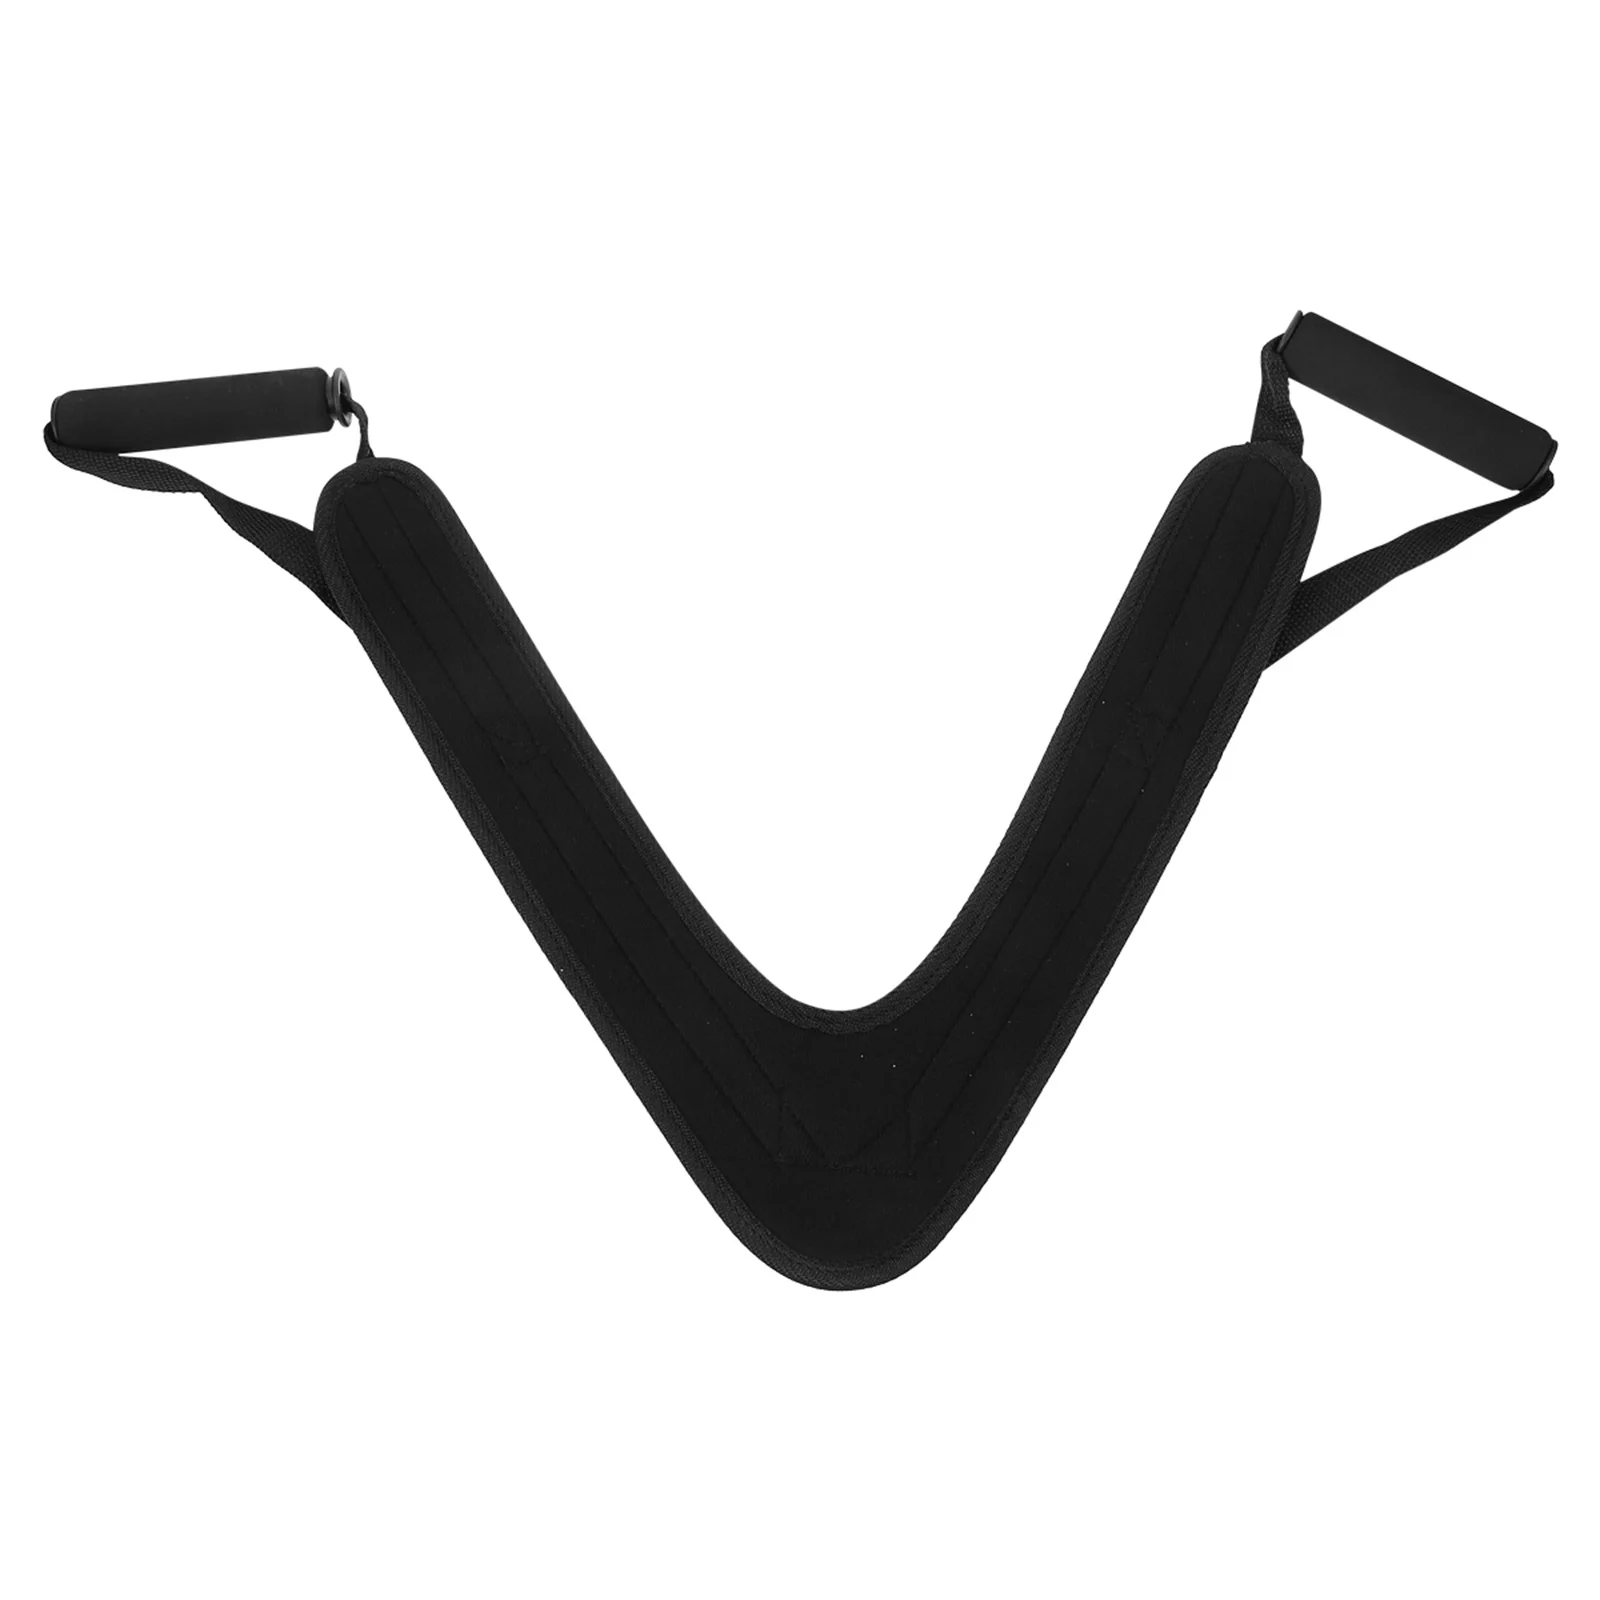 

Triangle Shoulder Strap Bodybuilding Boating Equipment Belt Exercise Fitness Nylon Workout Muscle Tool Handles Sports Alters